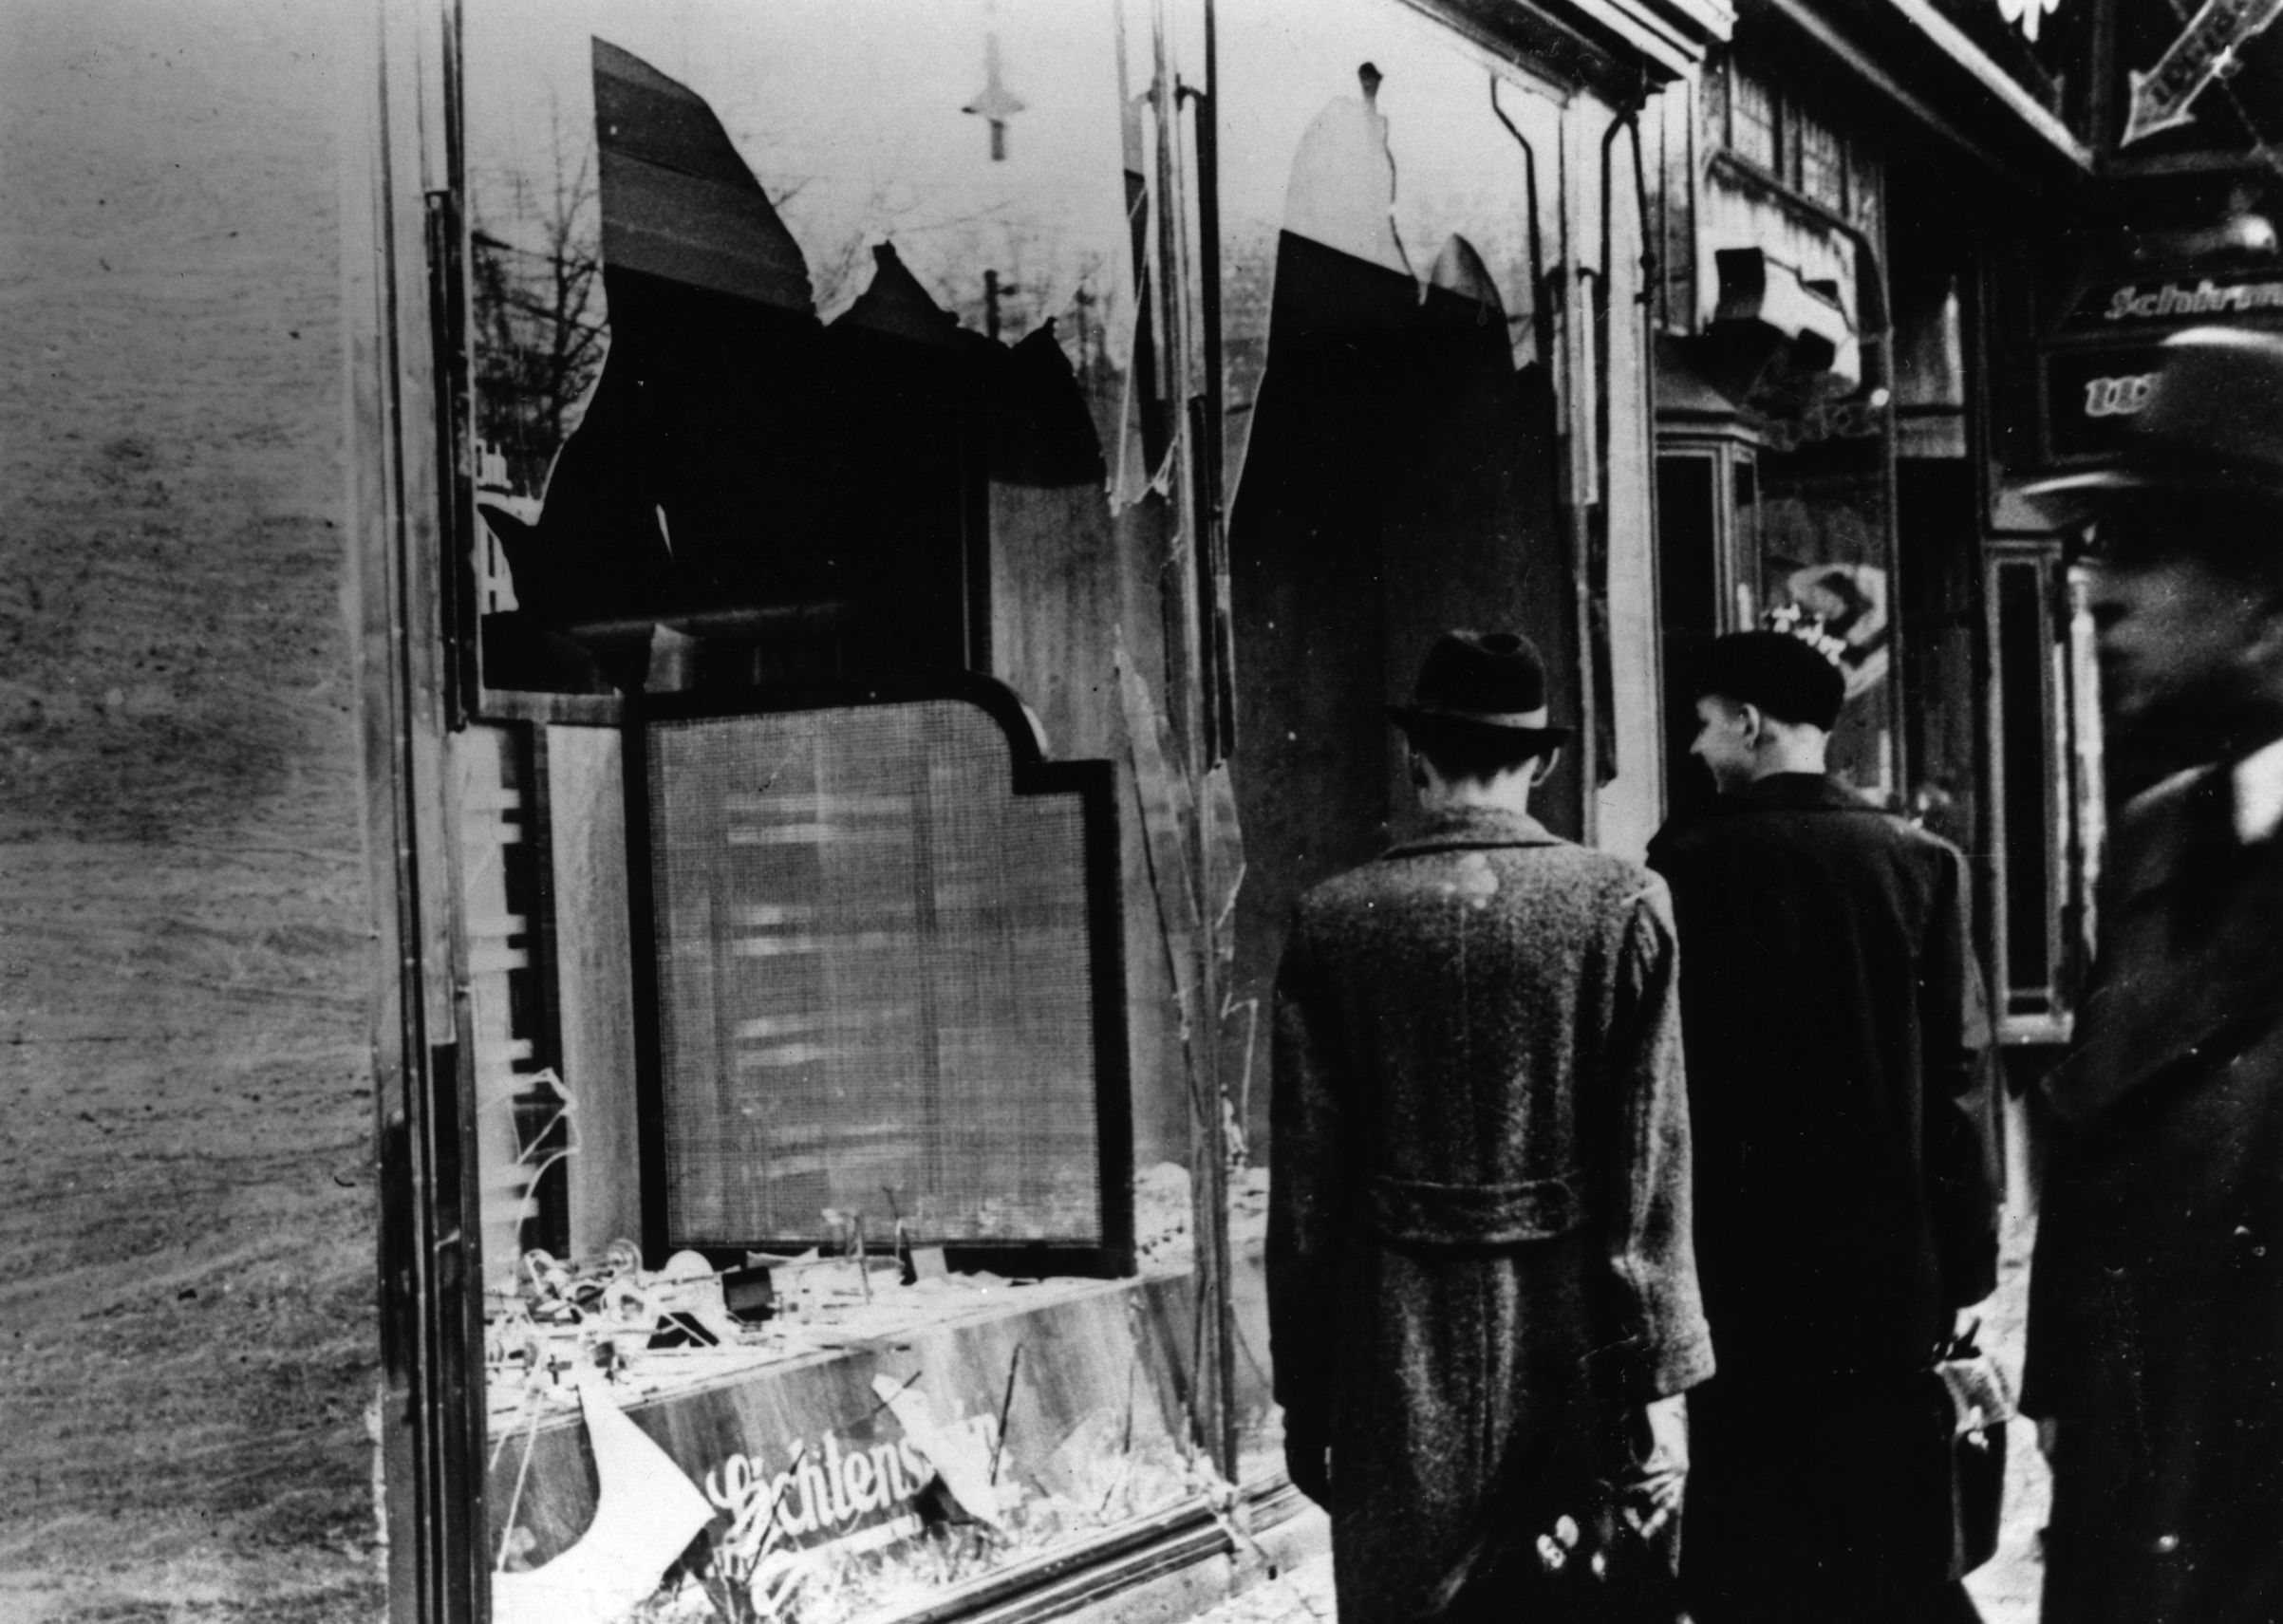 Nov. 10, 1938:  Three onlookers at a smashed Jewish shop window in Berlin following riots of the night of 9th November. (Hulton Archive/Getty Images)